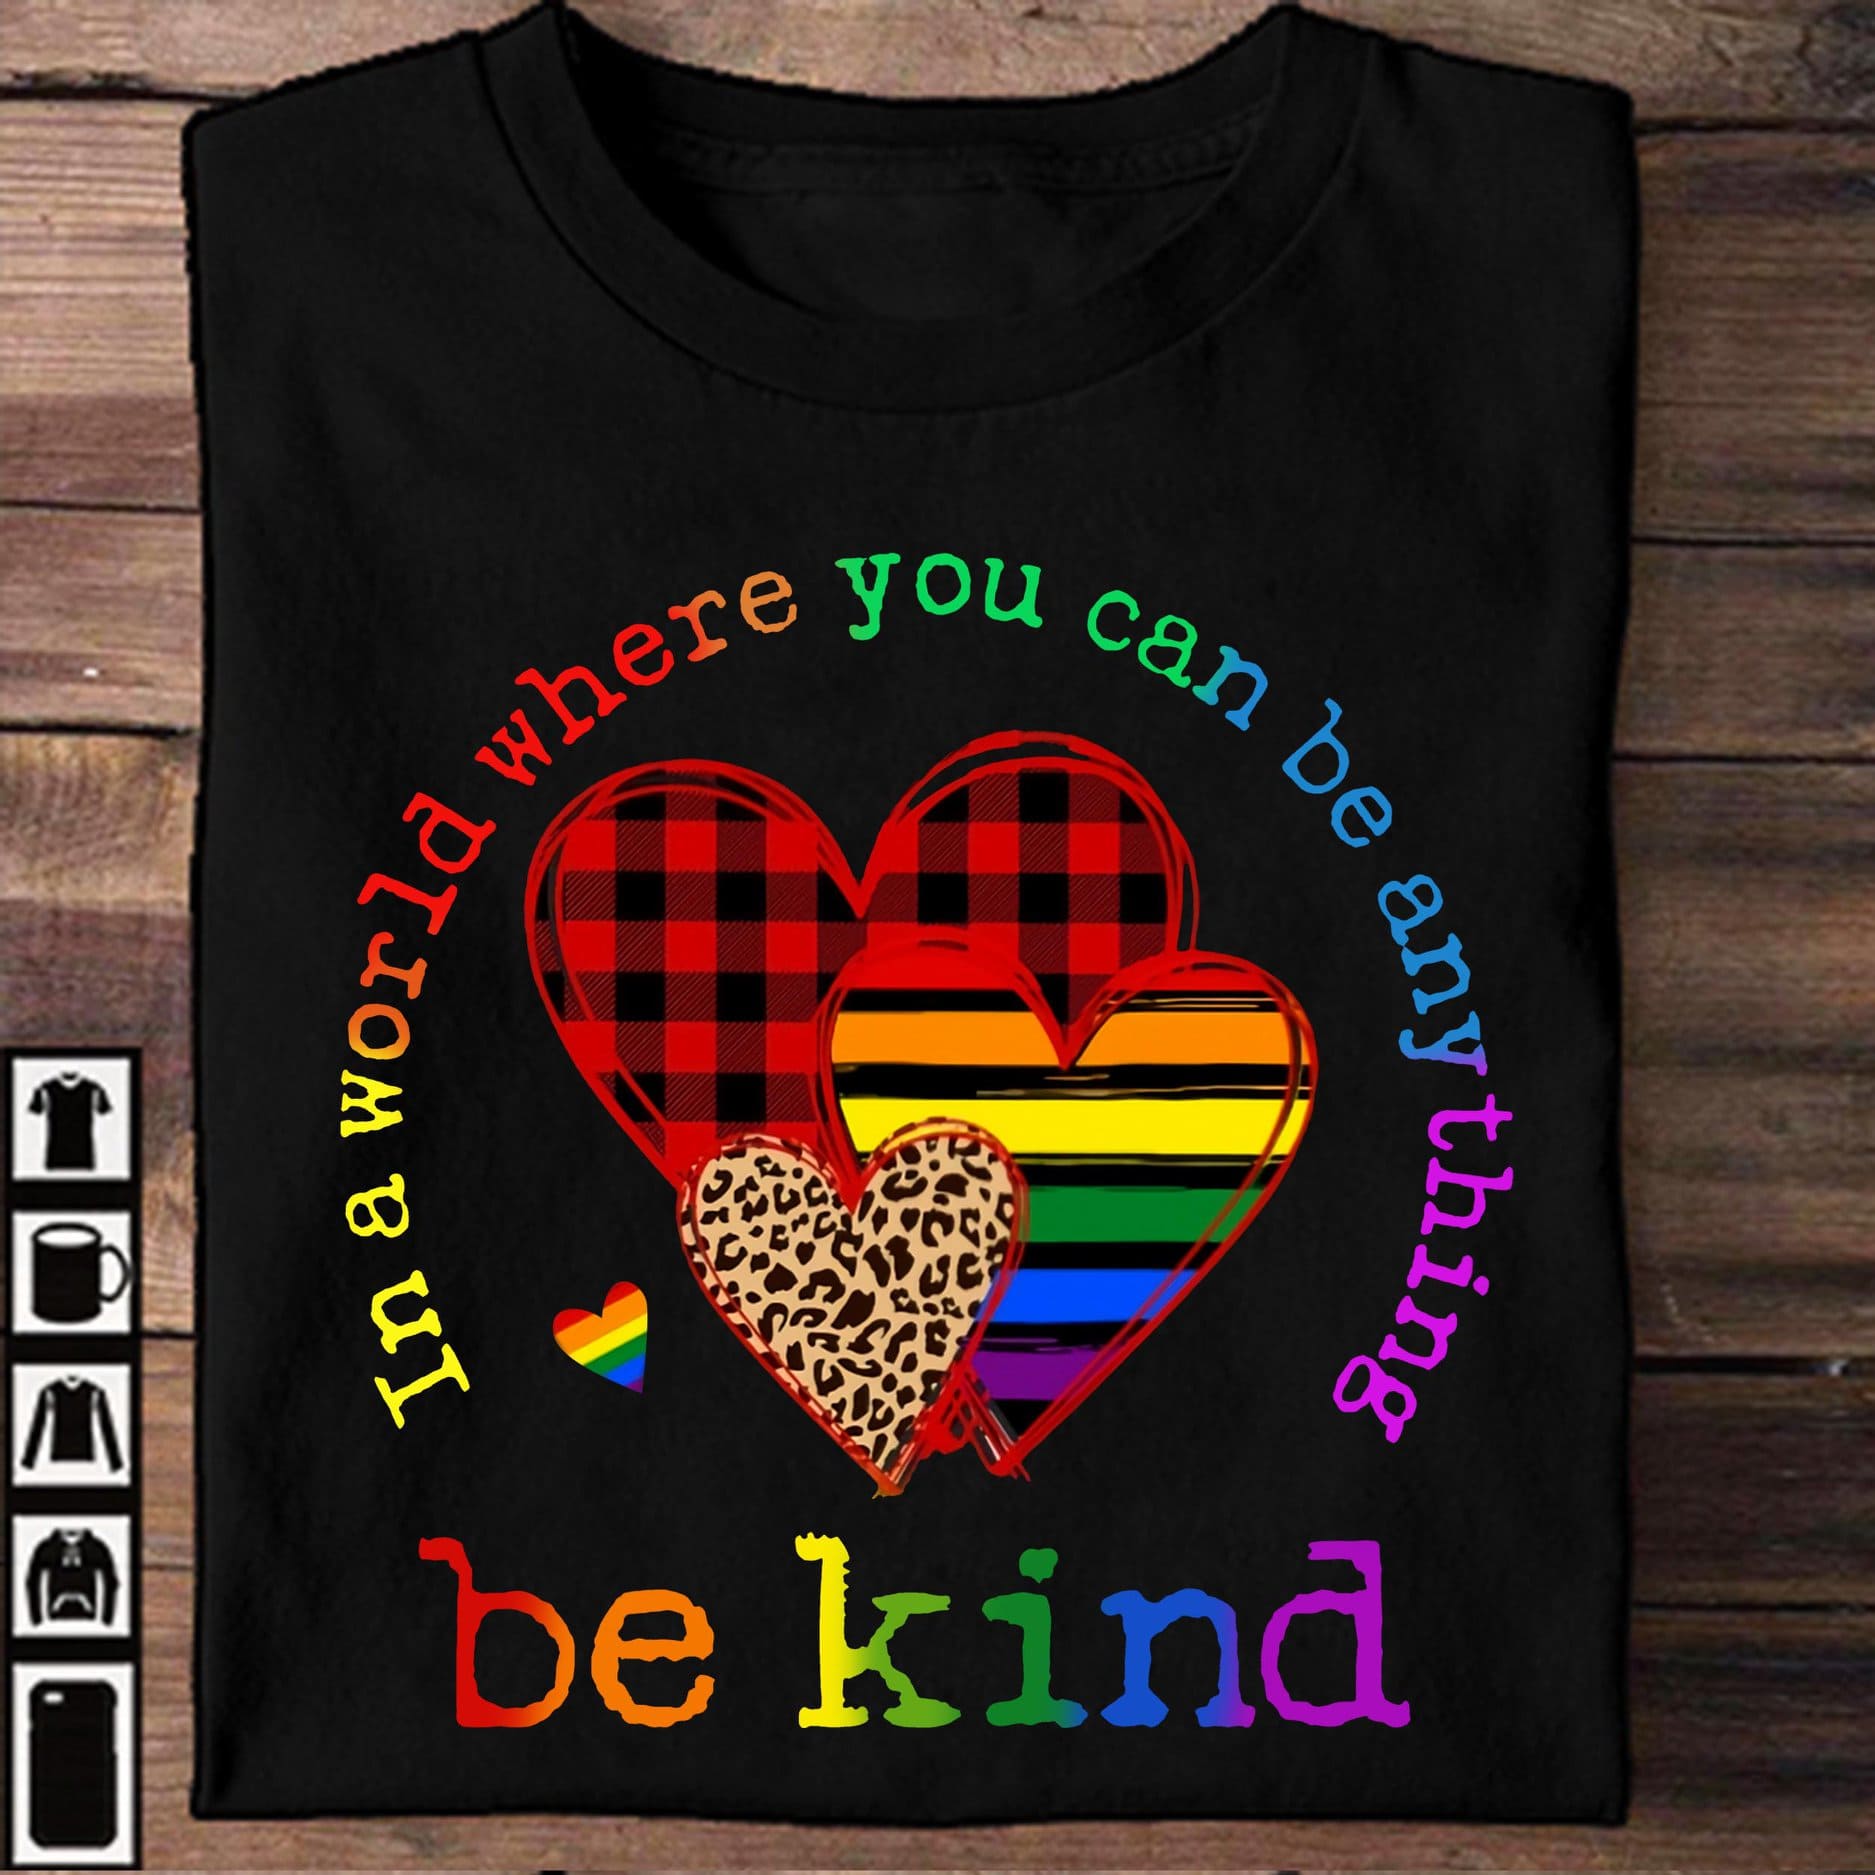 In a world where you can be anything, be kind - Lgbt community, Spread kindness